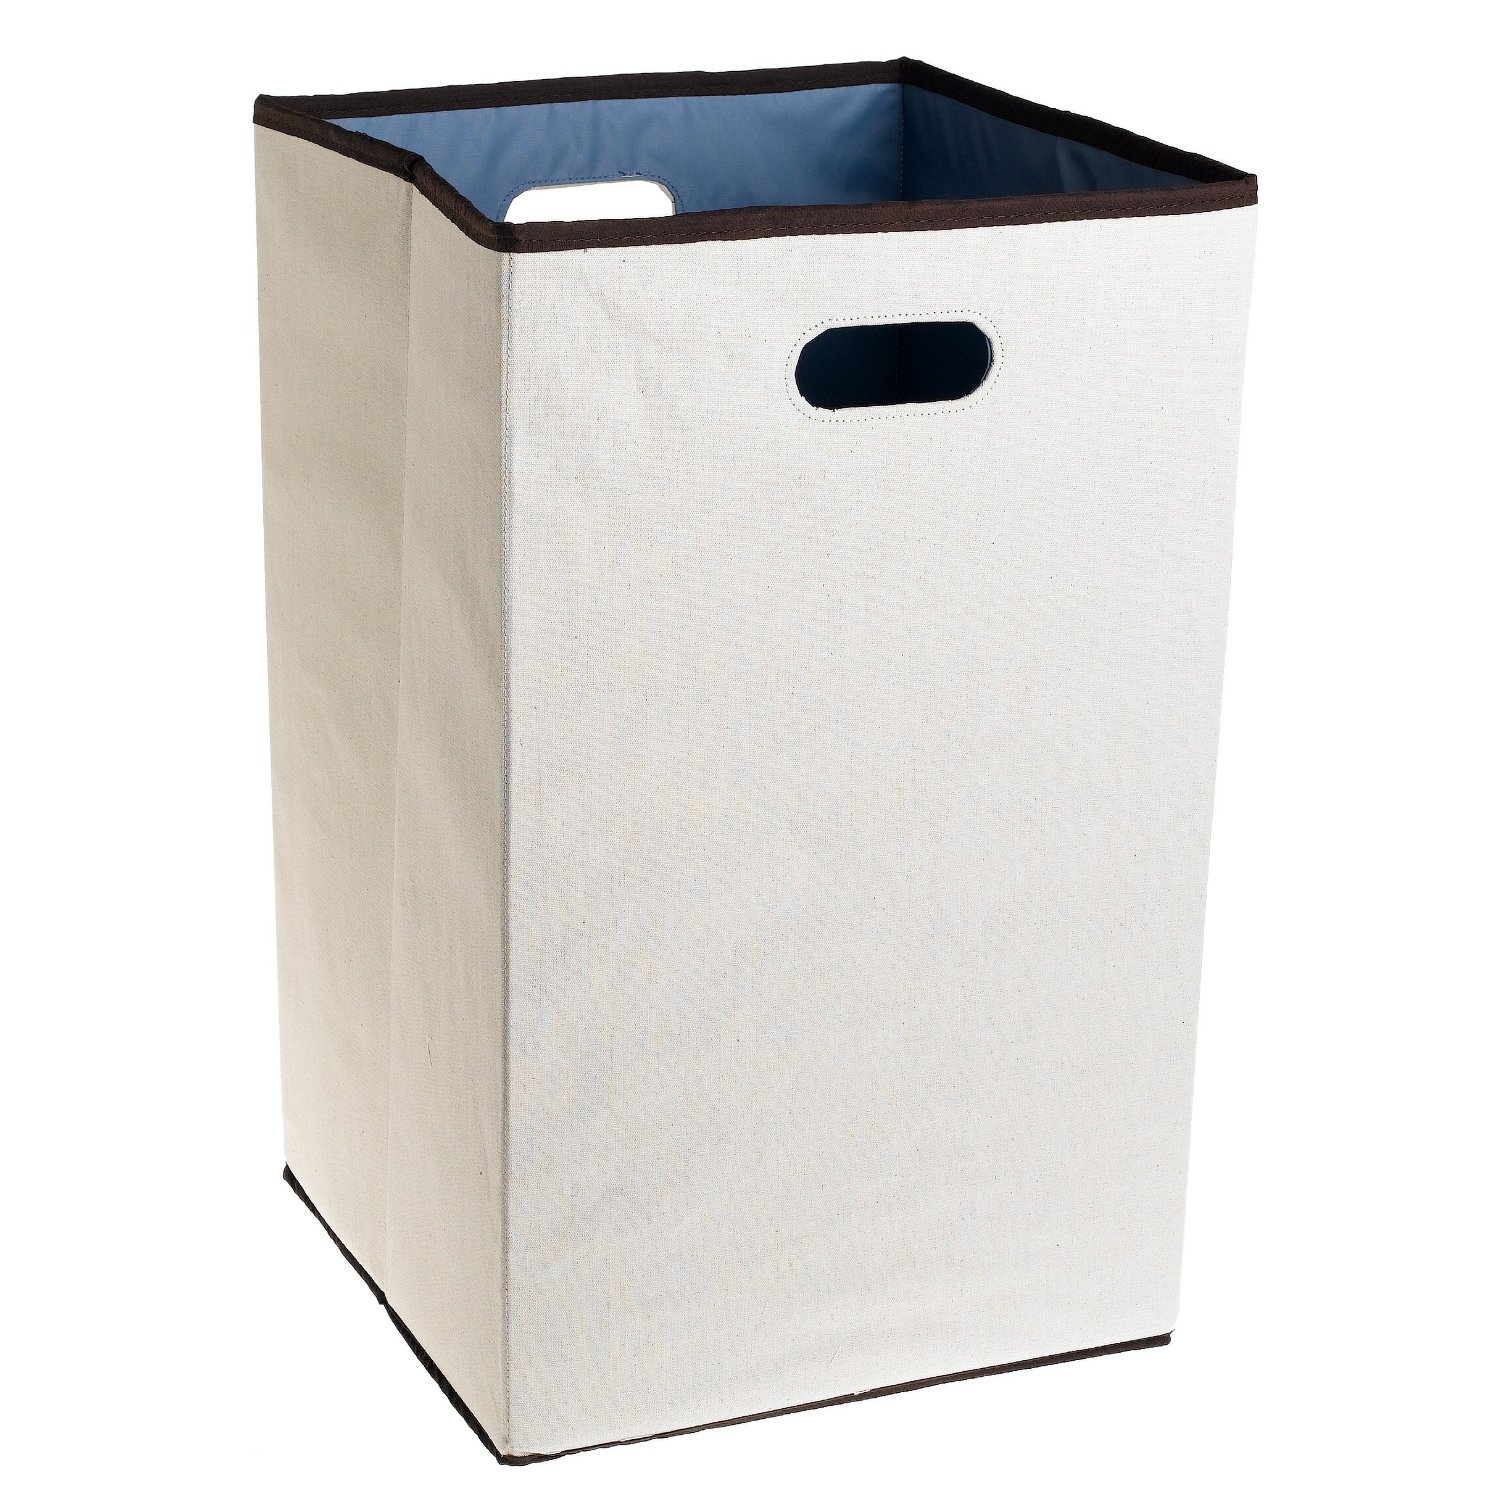 Rubbermaid 4D06 Configurations 23-Inch Foldable Laundry Hamper, Natural, $9.08